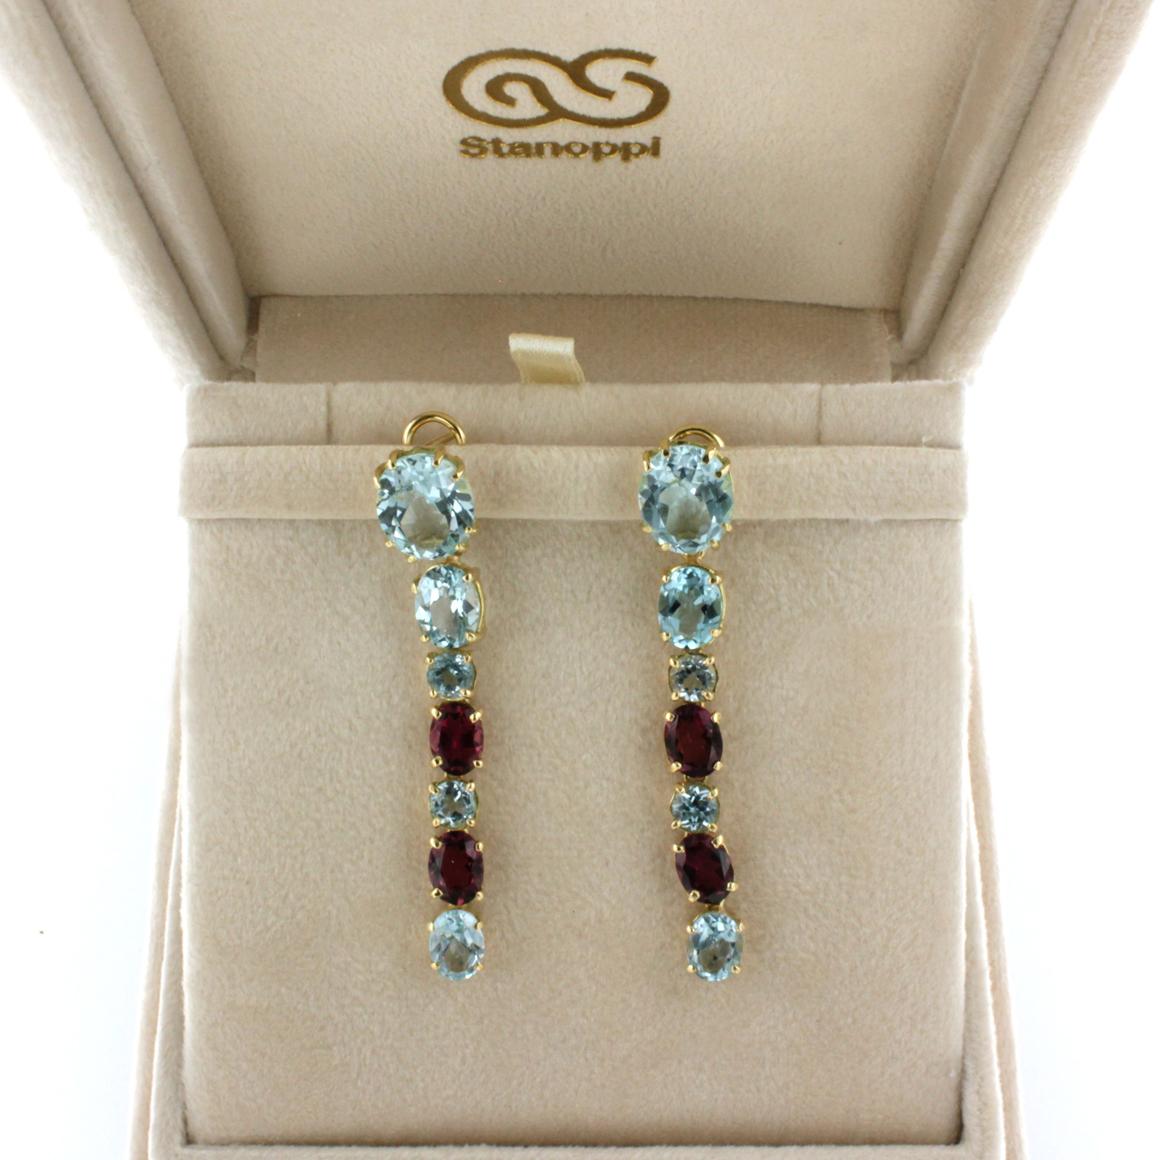 Women's or Men's 18k Rose Yellow Gold with Blue Topaz and Pink Tourmaline Earrings